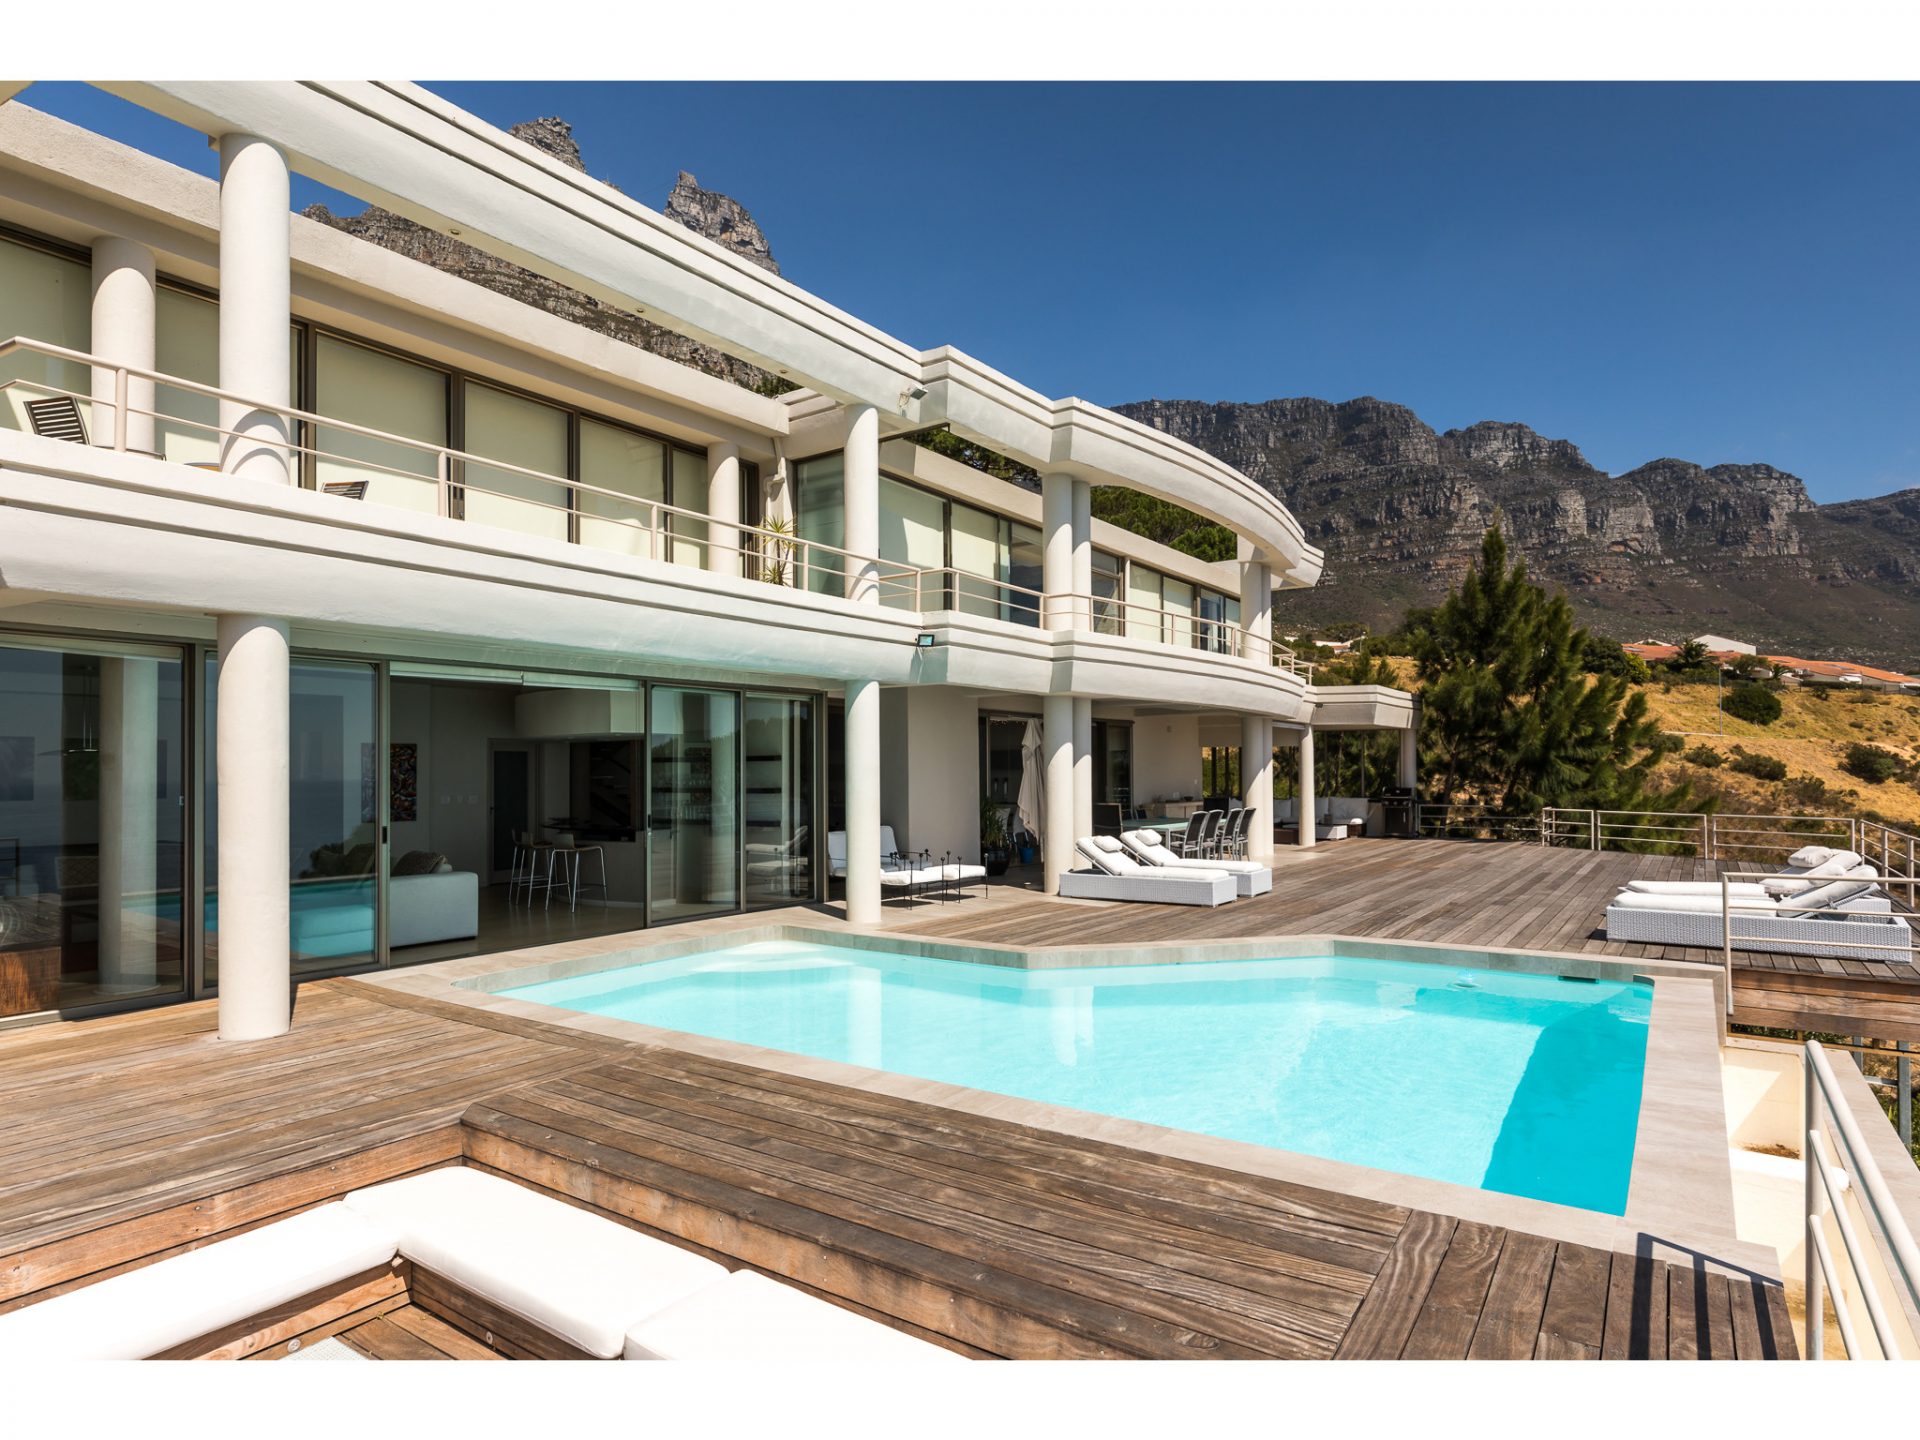 Photo 17 of Geneva Sunsets accommodation in Camps Bay, Cape Town with 6 bedrooms and 7 bathrooms